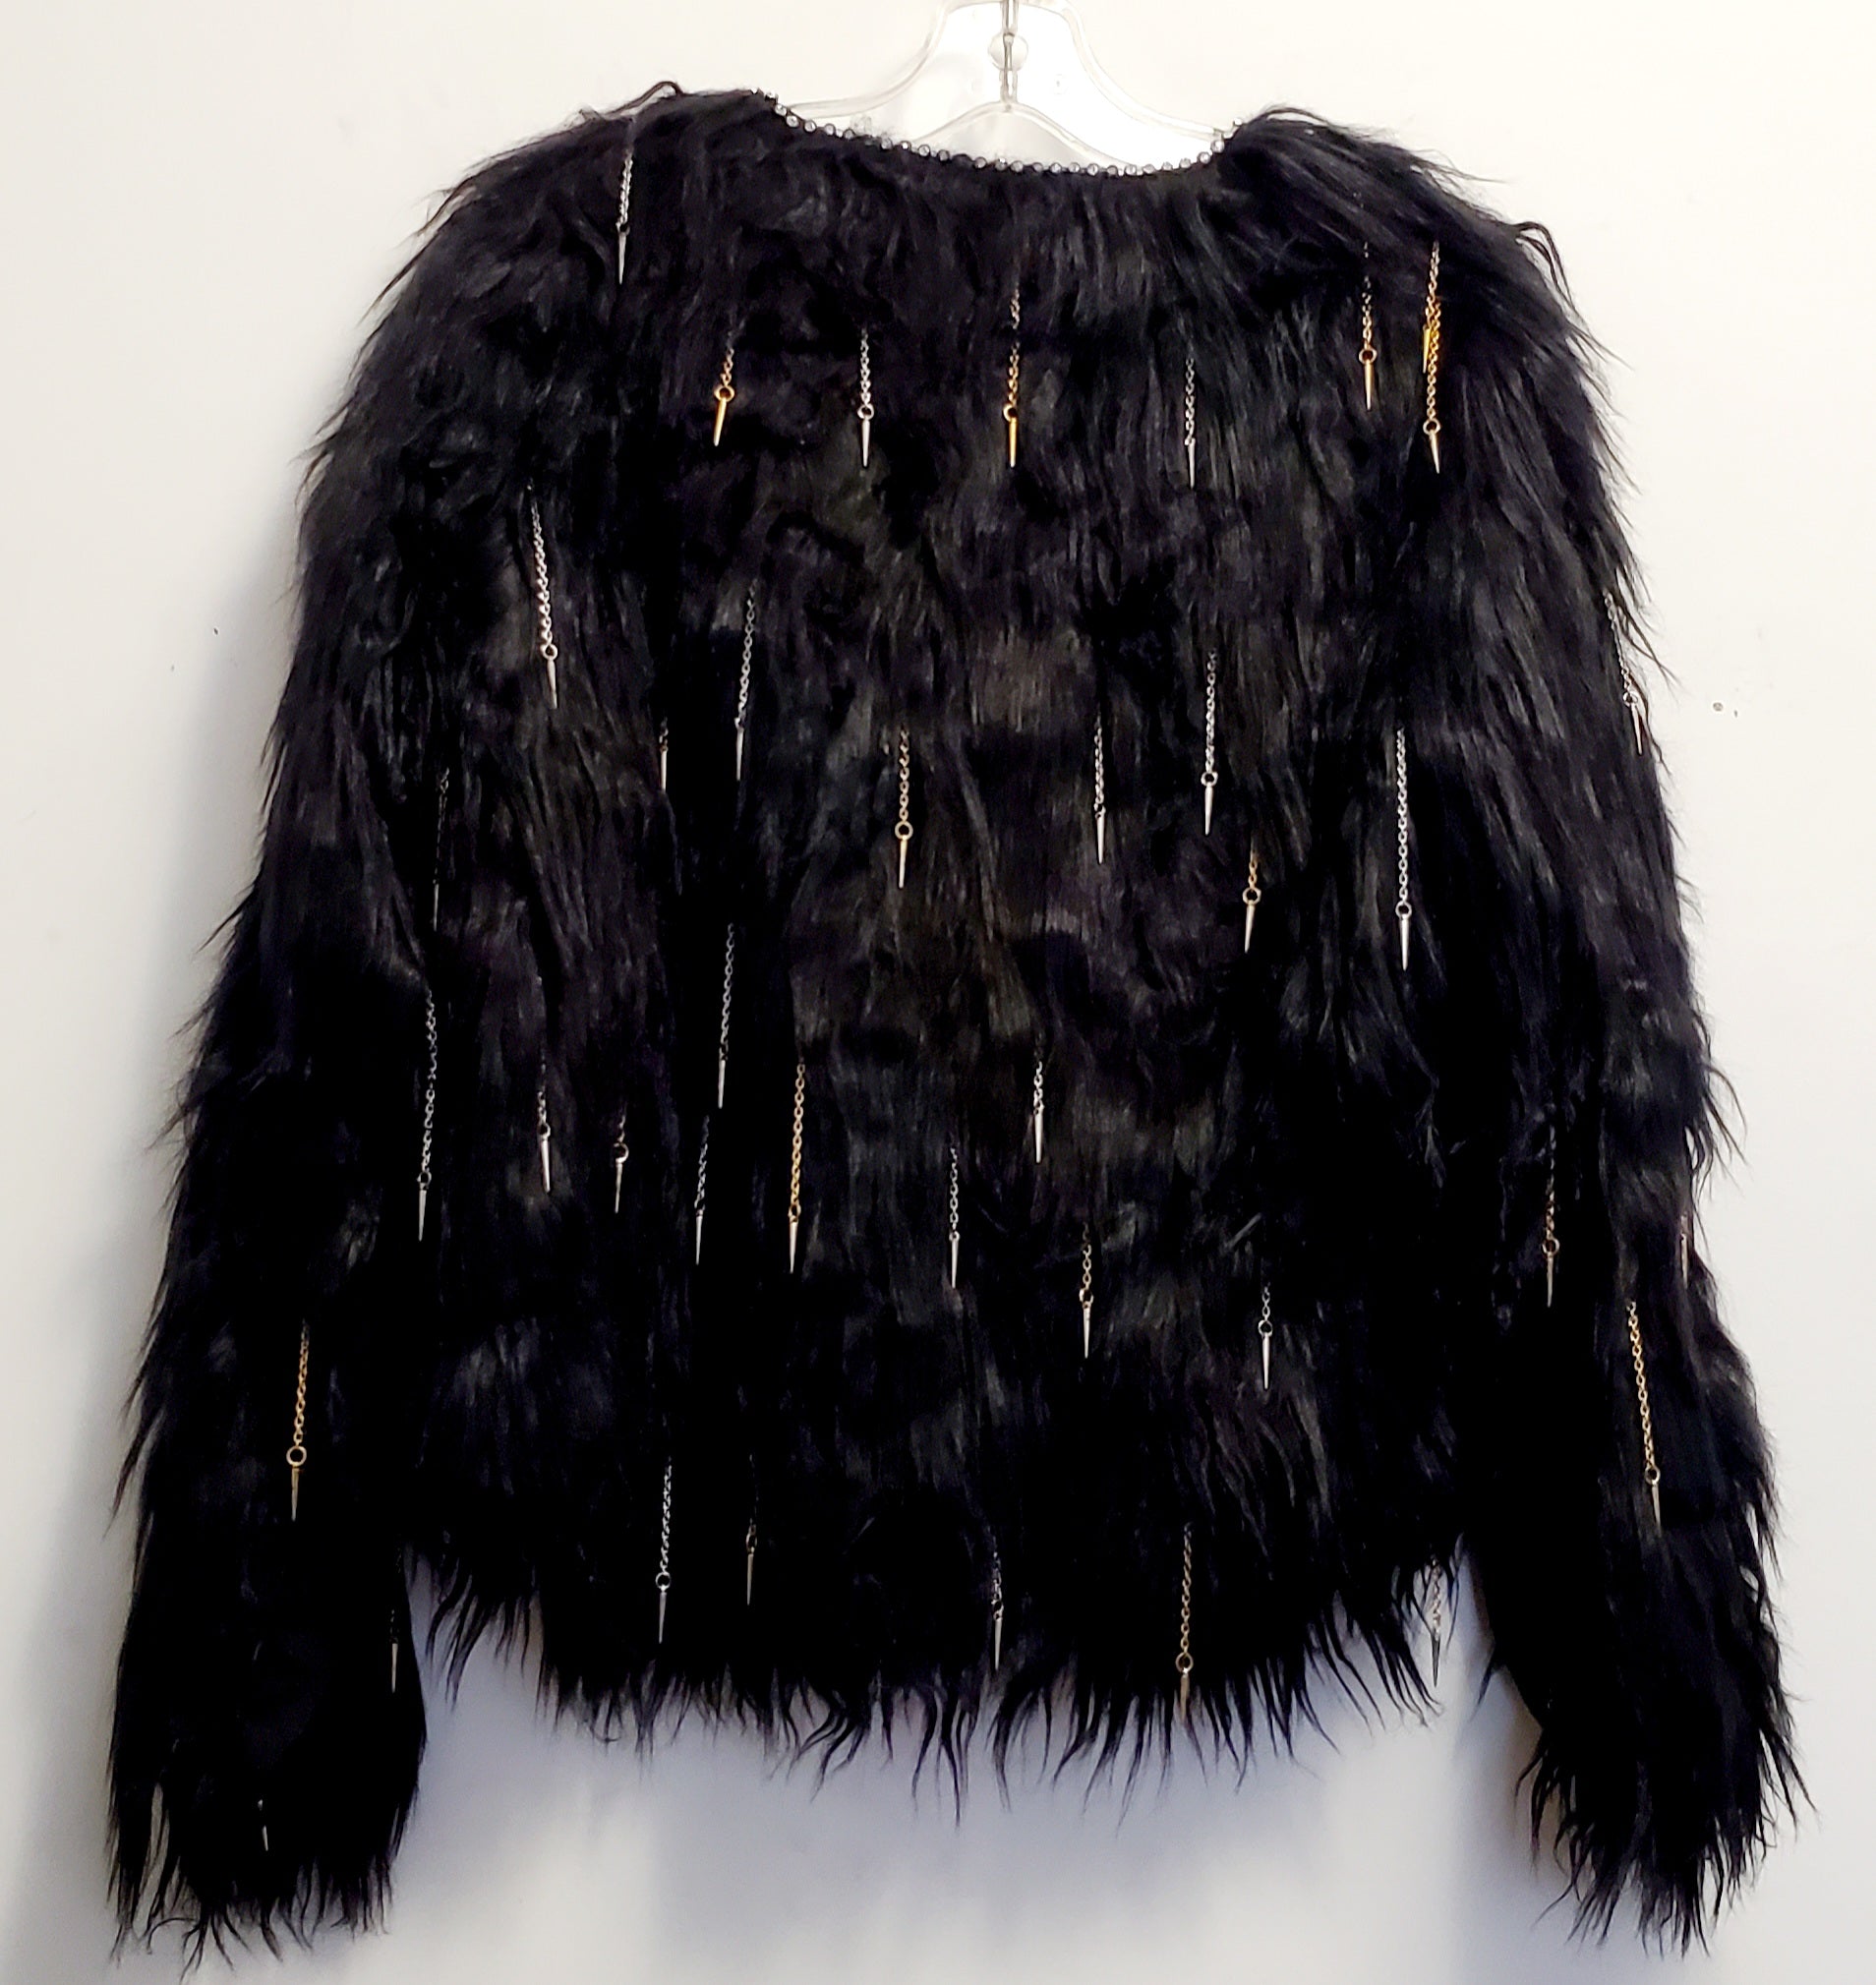 back view of faux fur black coat with chain and spike details 